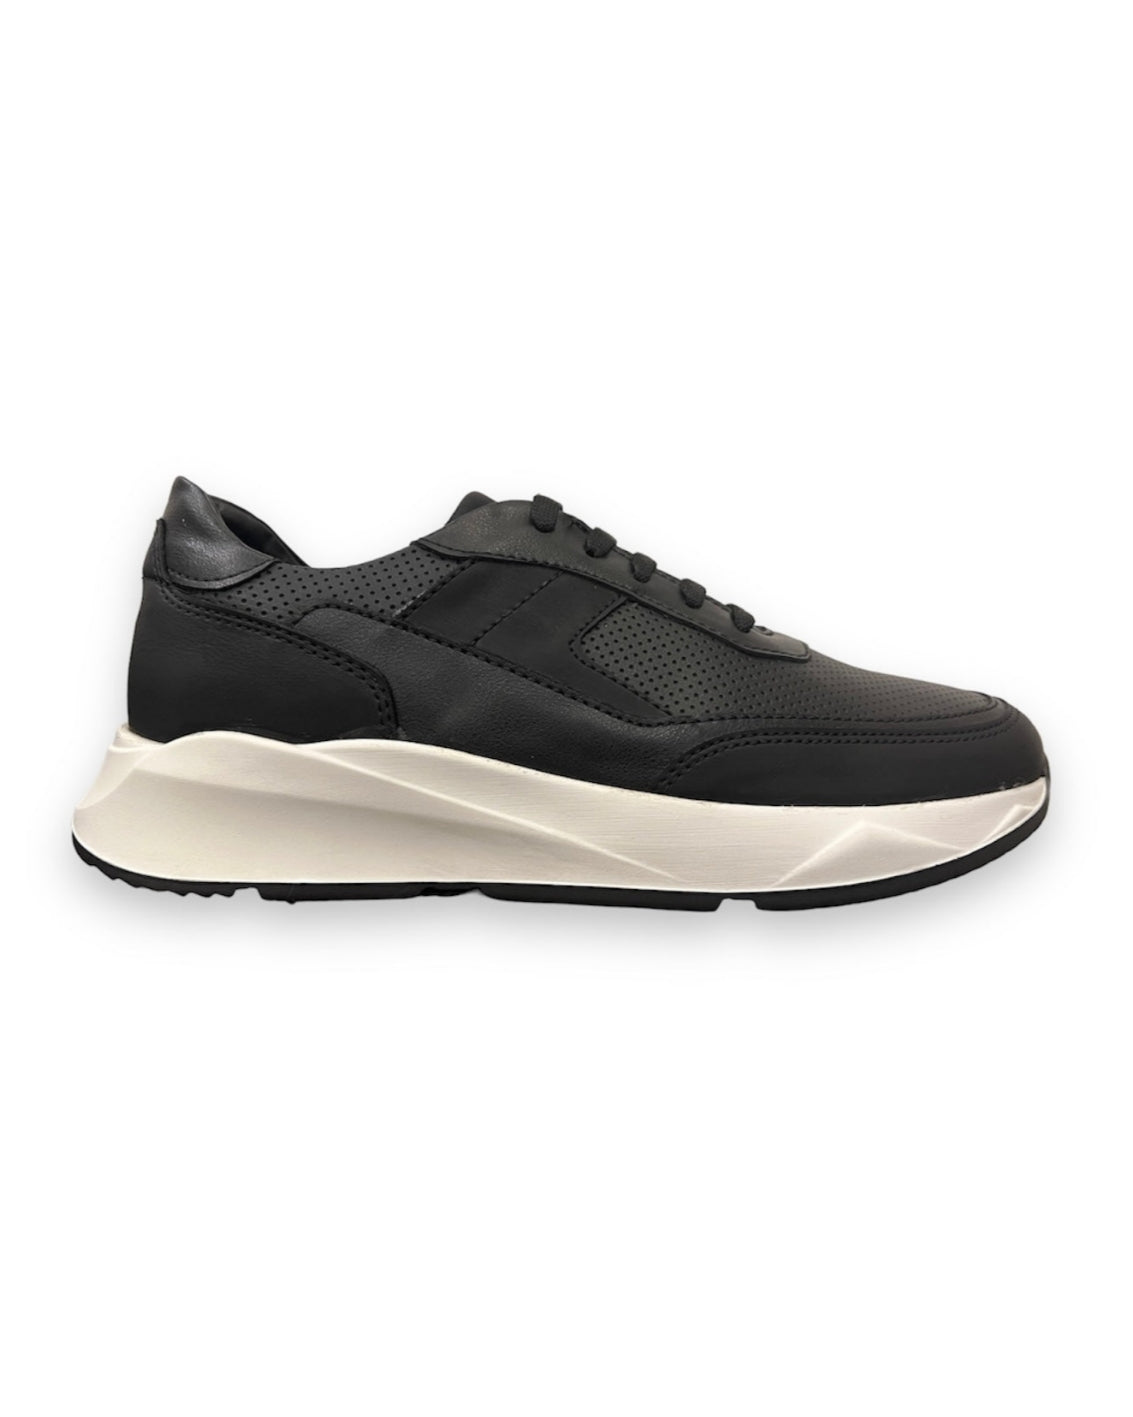 2H #9511 Black/White Casual Shoes